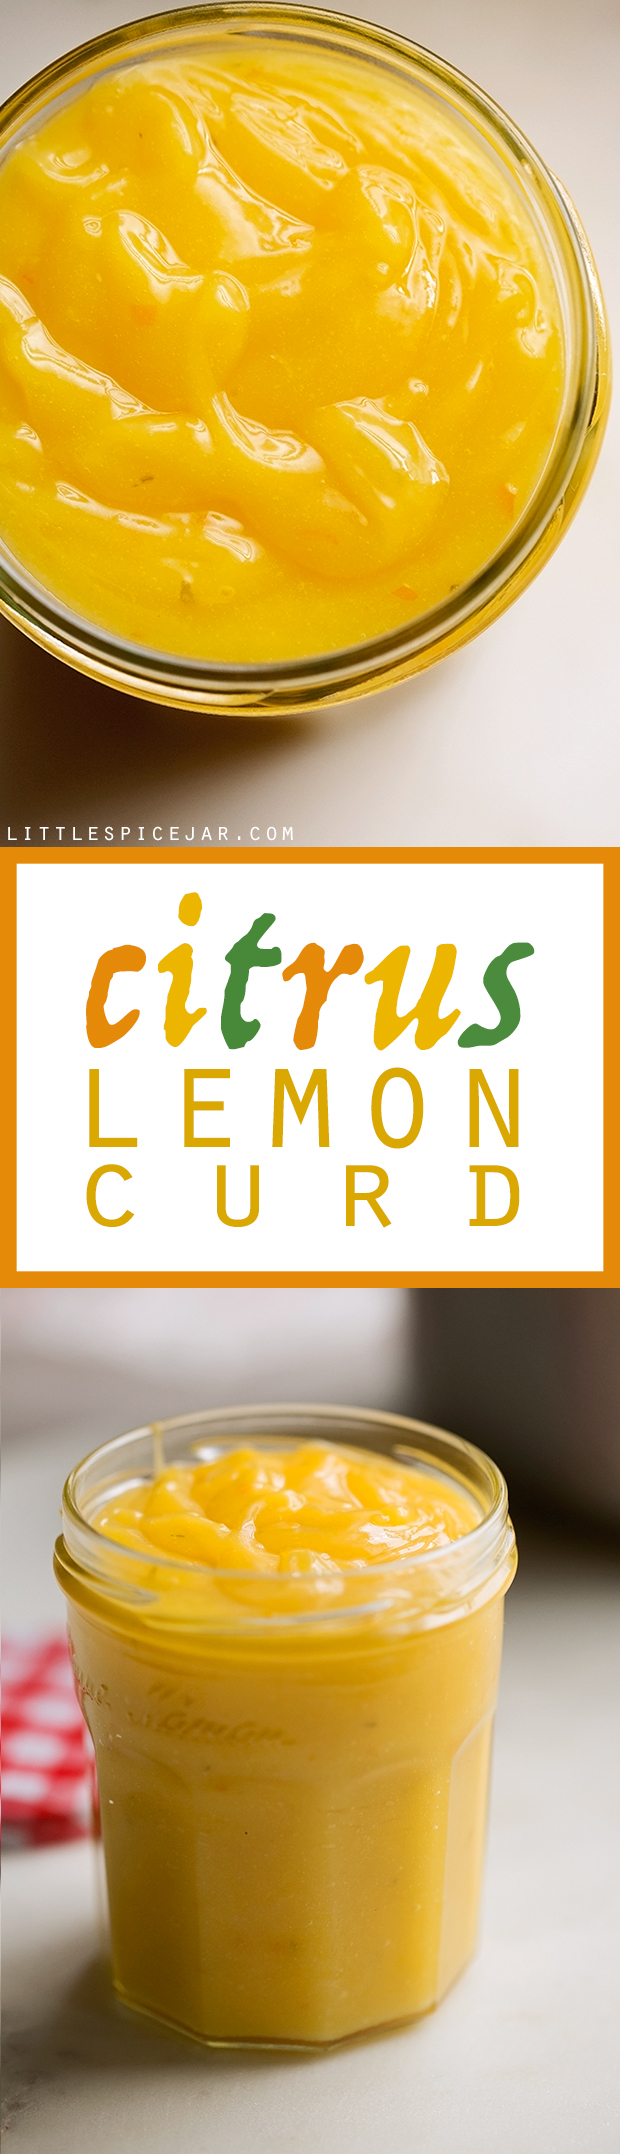 Easy Citrus Lemon Curd - made with meyer lemons and limes! No need for special equipment, this recipe is super easy to make! #lemoncurd #limecurd #citruscurd | Littlespicejar.com